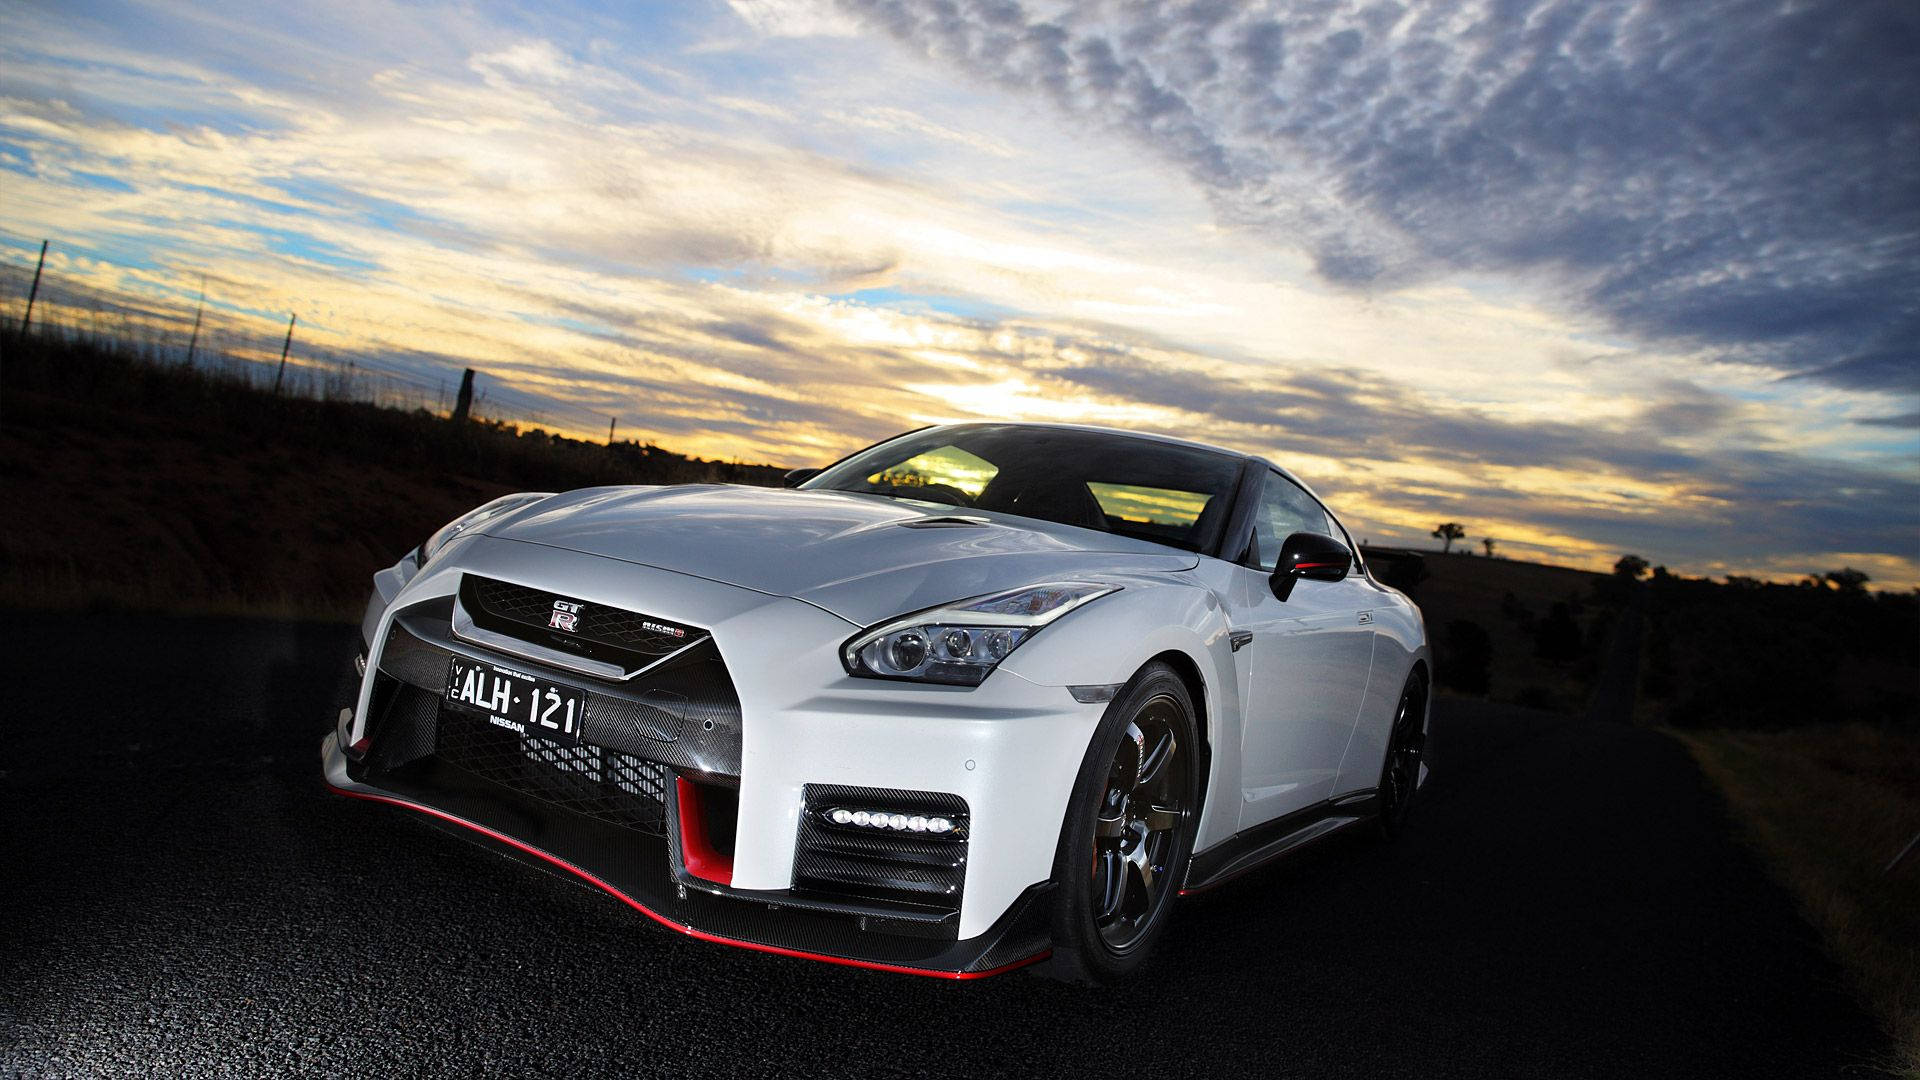 Front View Of A White Nissan GTR Car Wallpaper